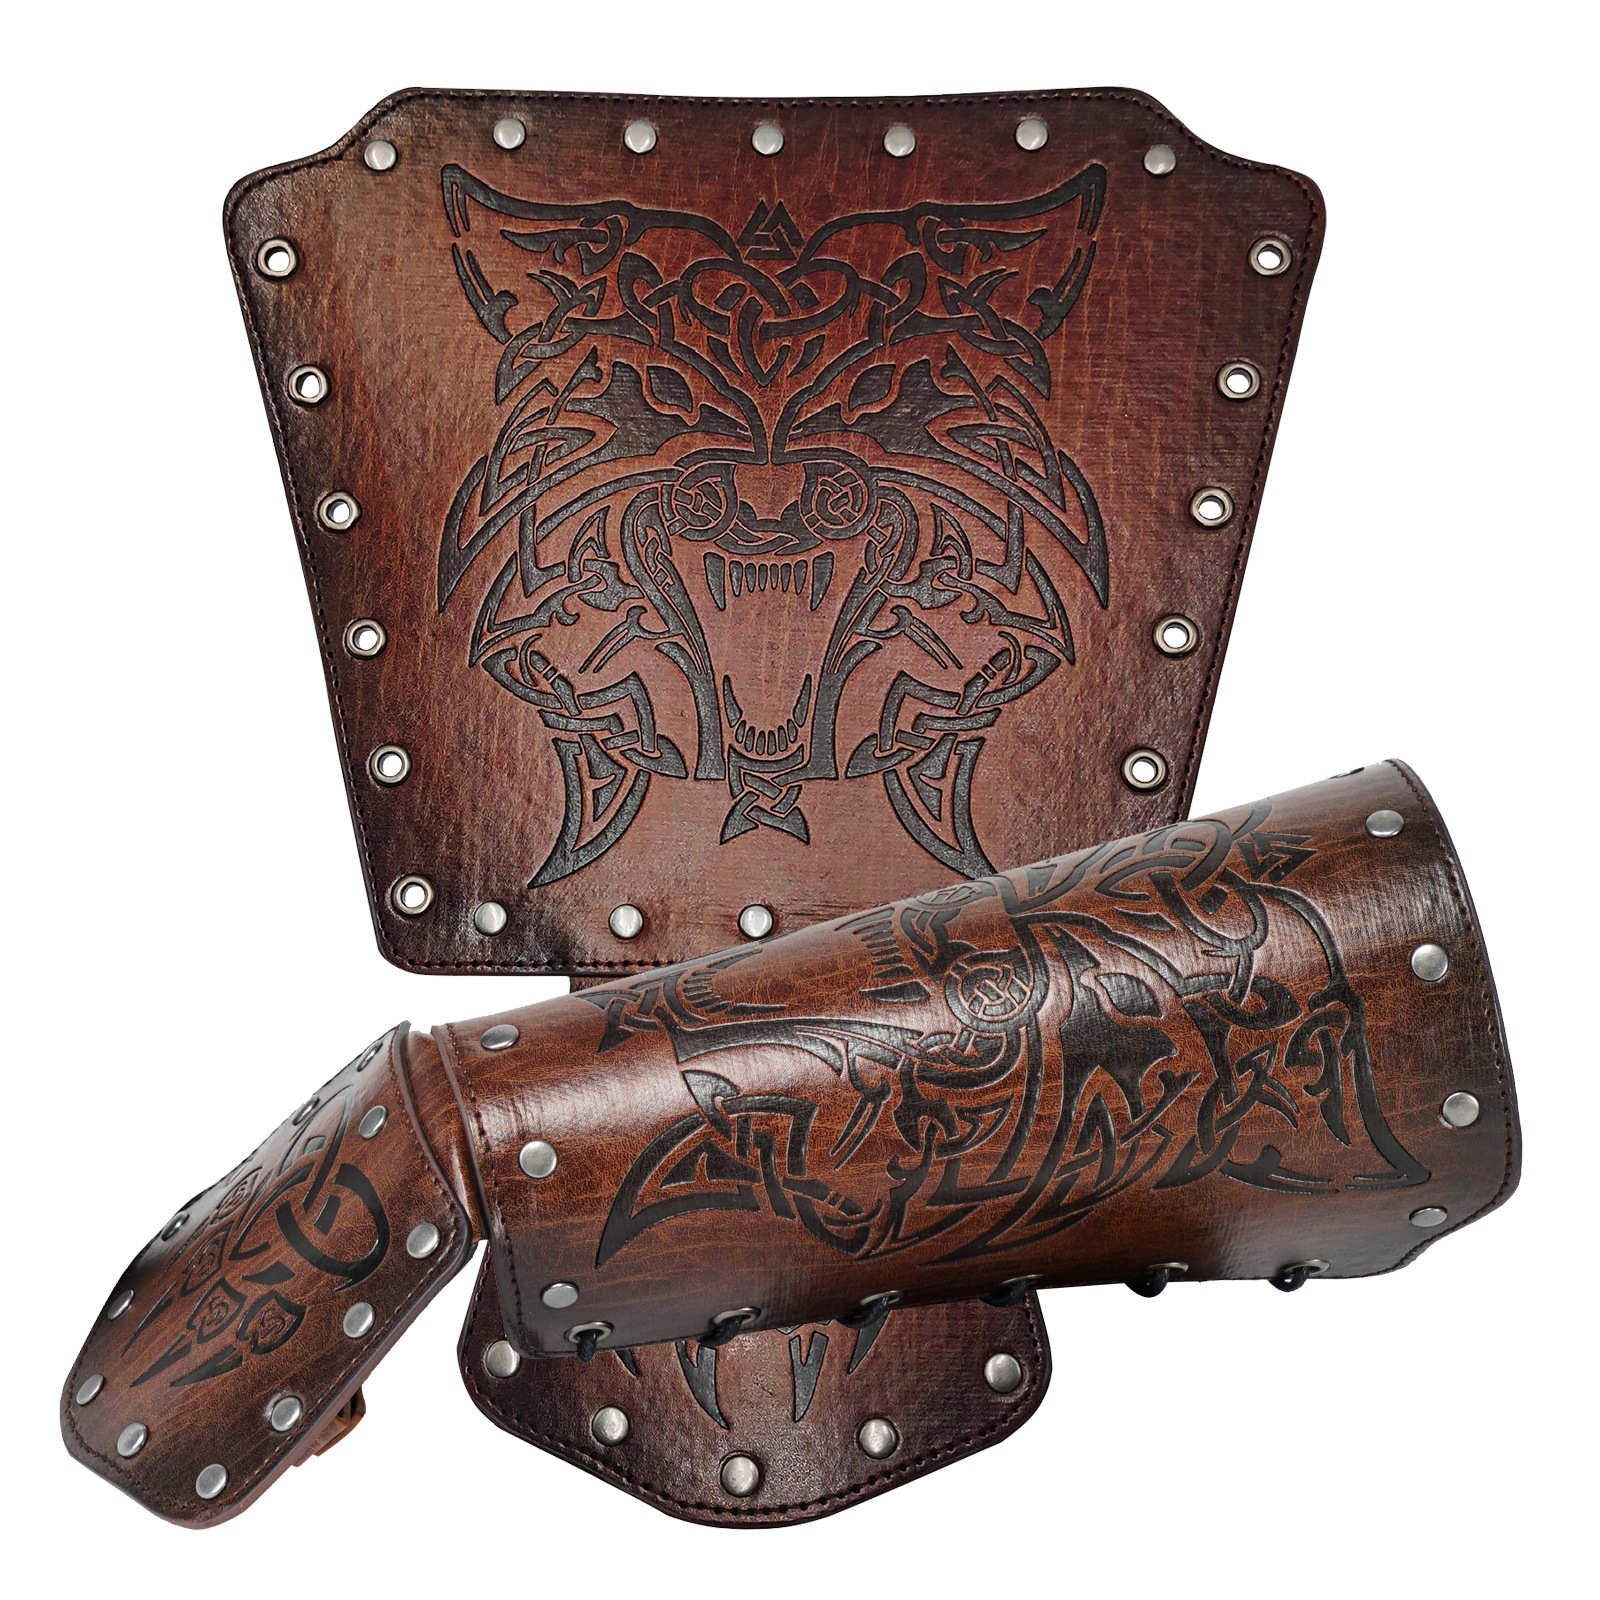 Northern Europe Vikings style Embossed Langtou Wristband the medieval times knight style Hand guard COSPLAY Stage props